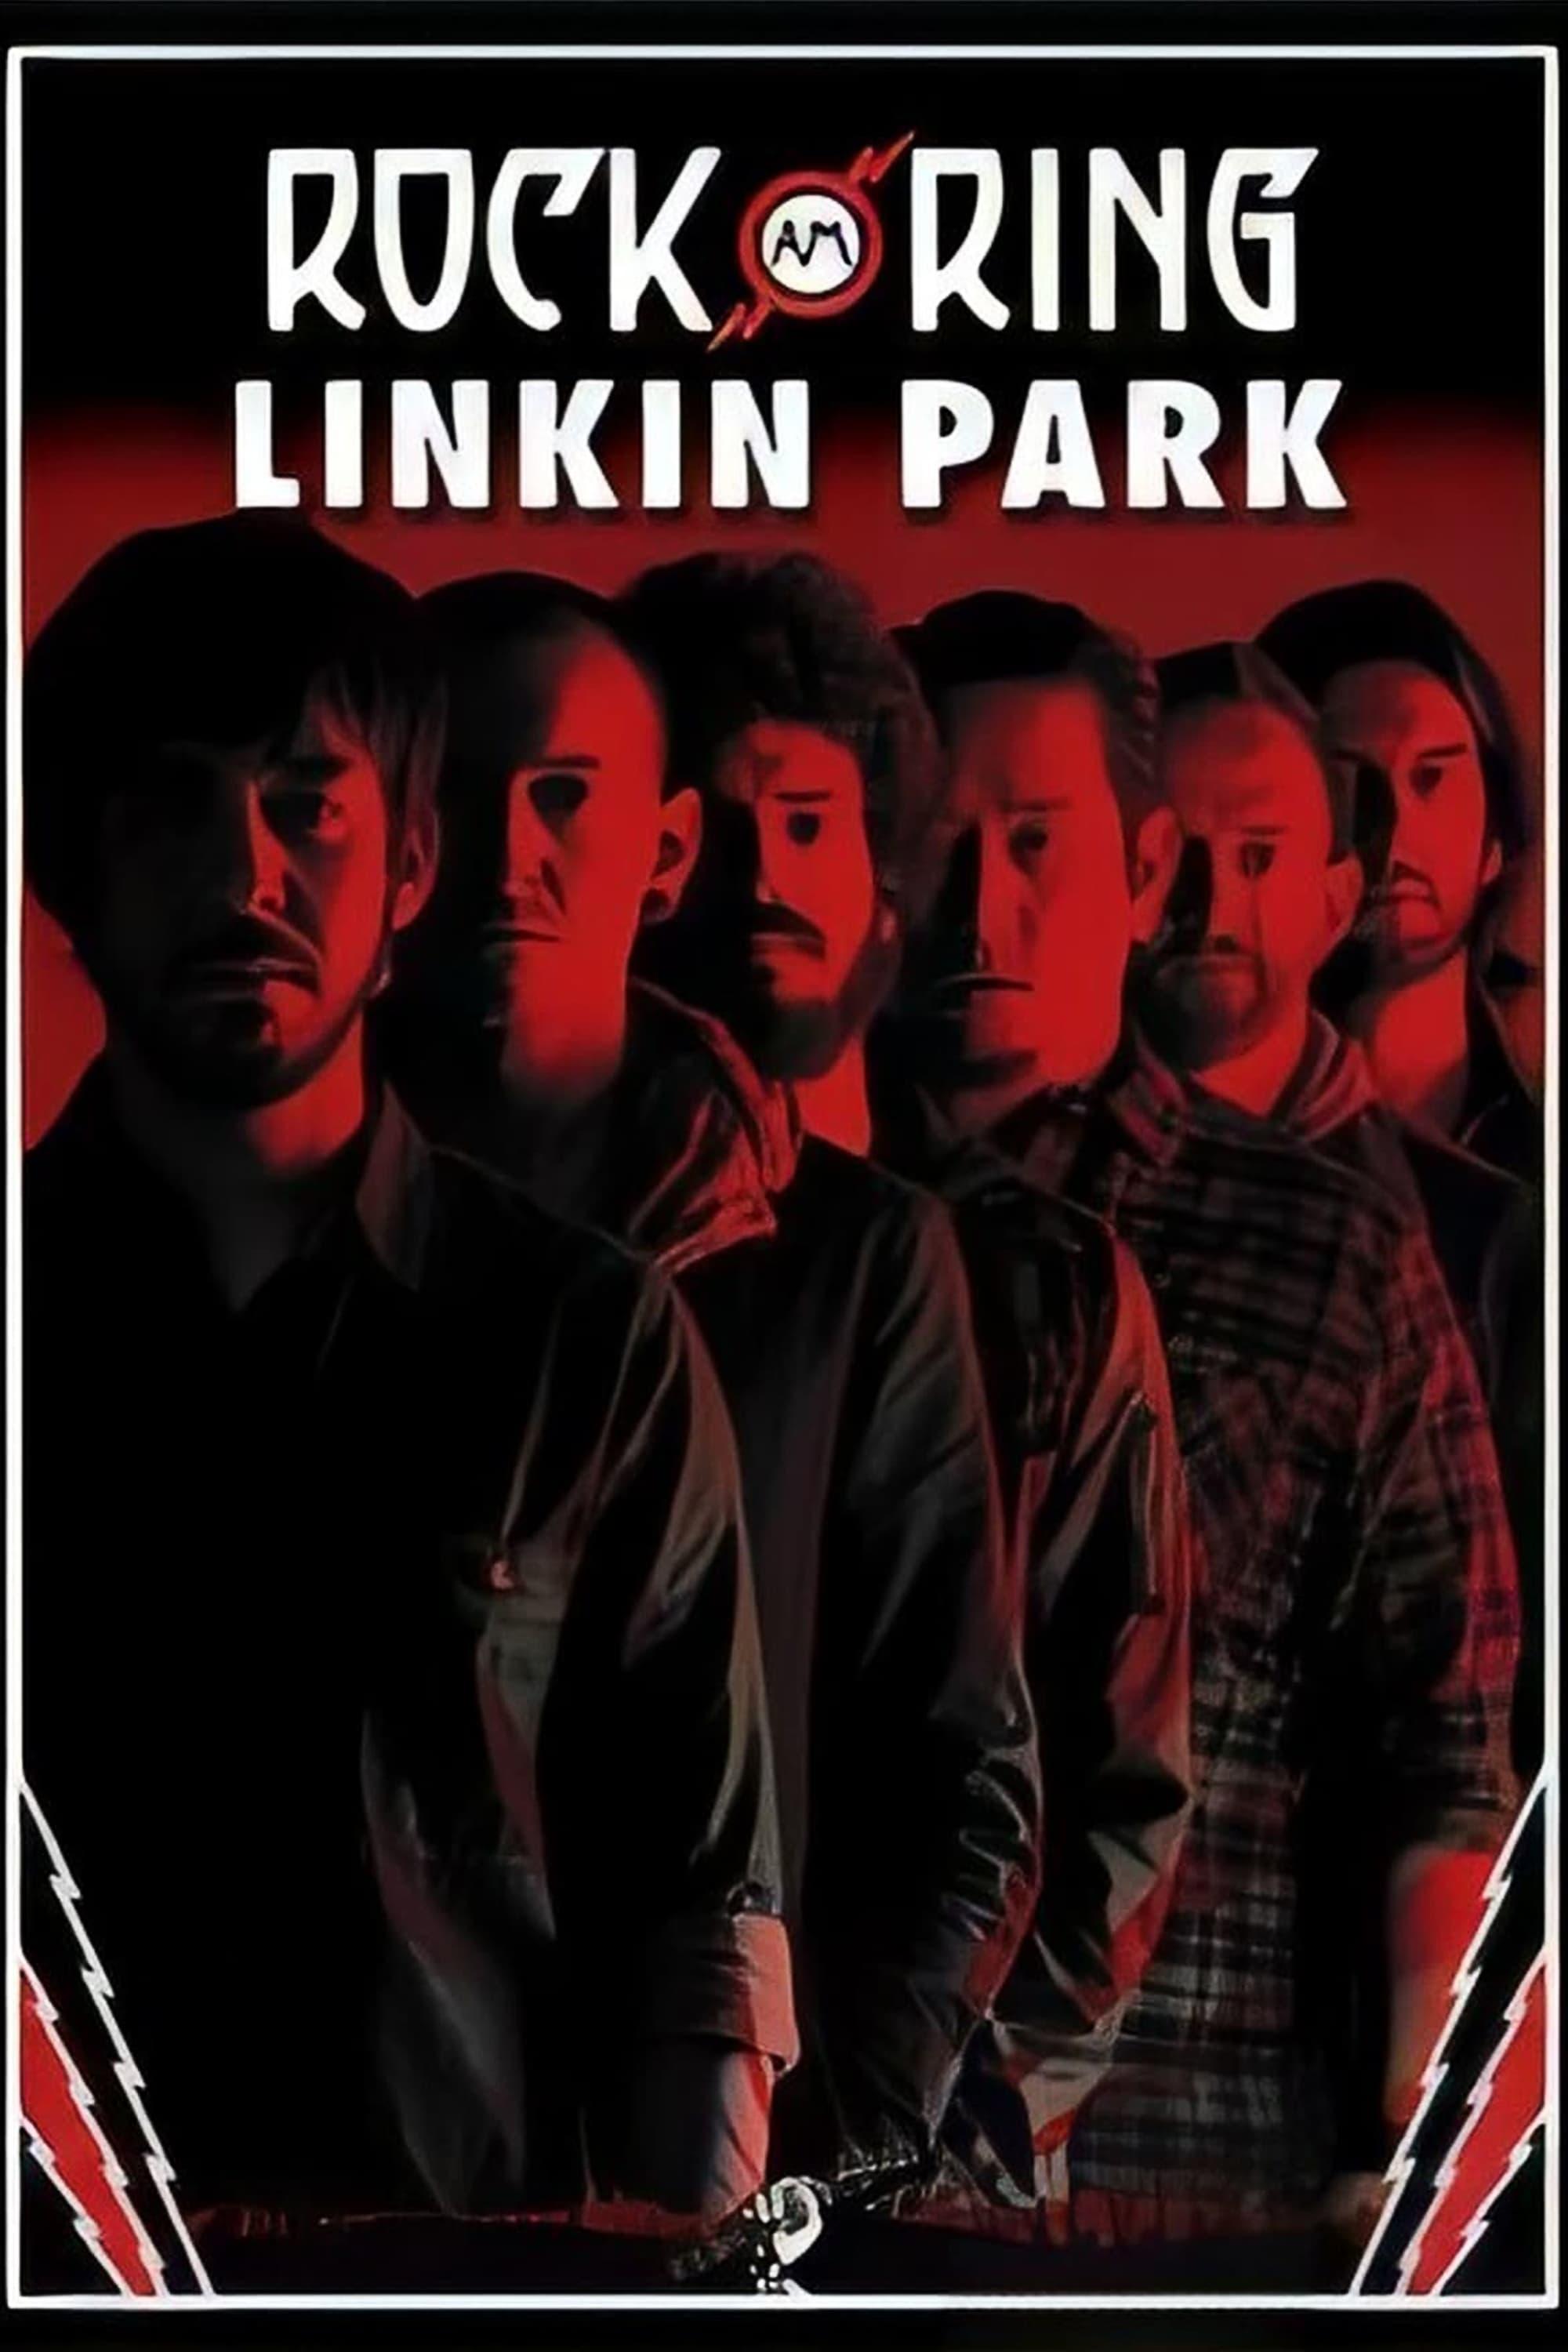 Linkin Park: Live at Rock Am Ring poster